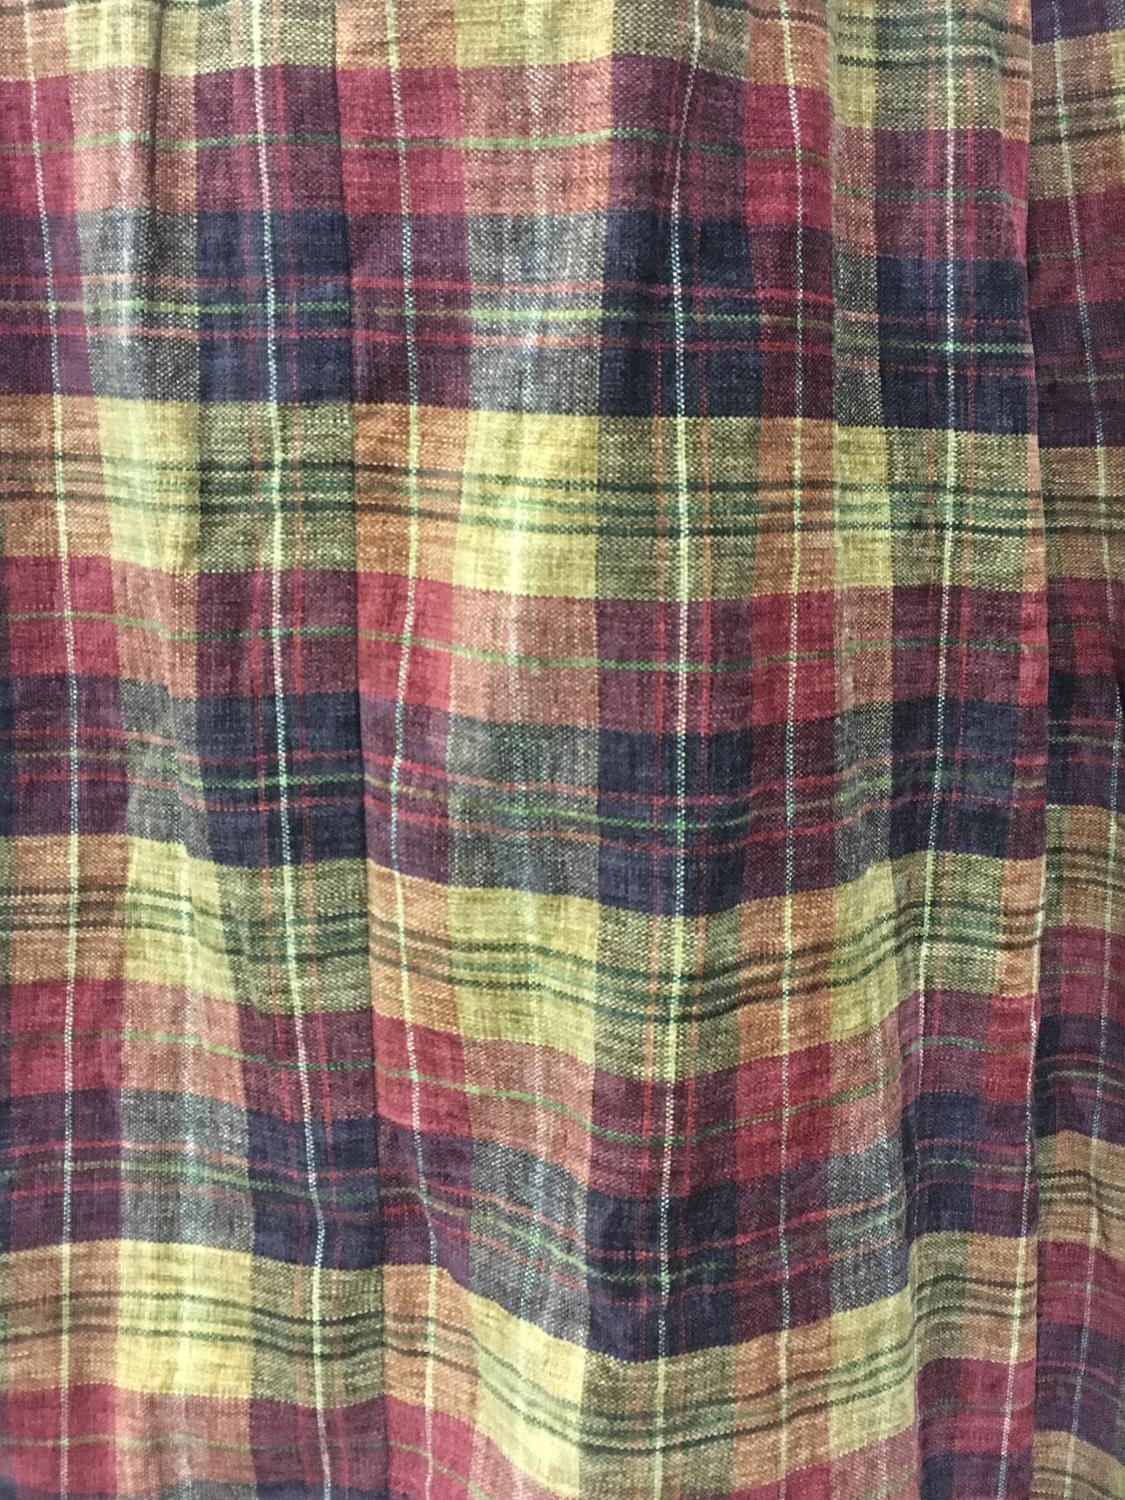 A pair of Burberry check double lined Curtains 6ft 6in L x 5ft W (approx)